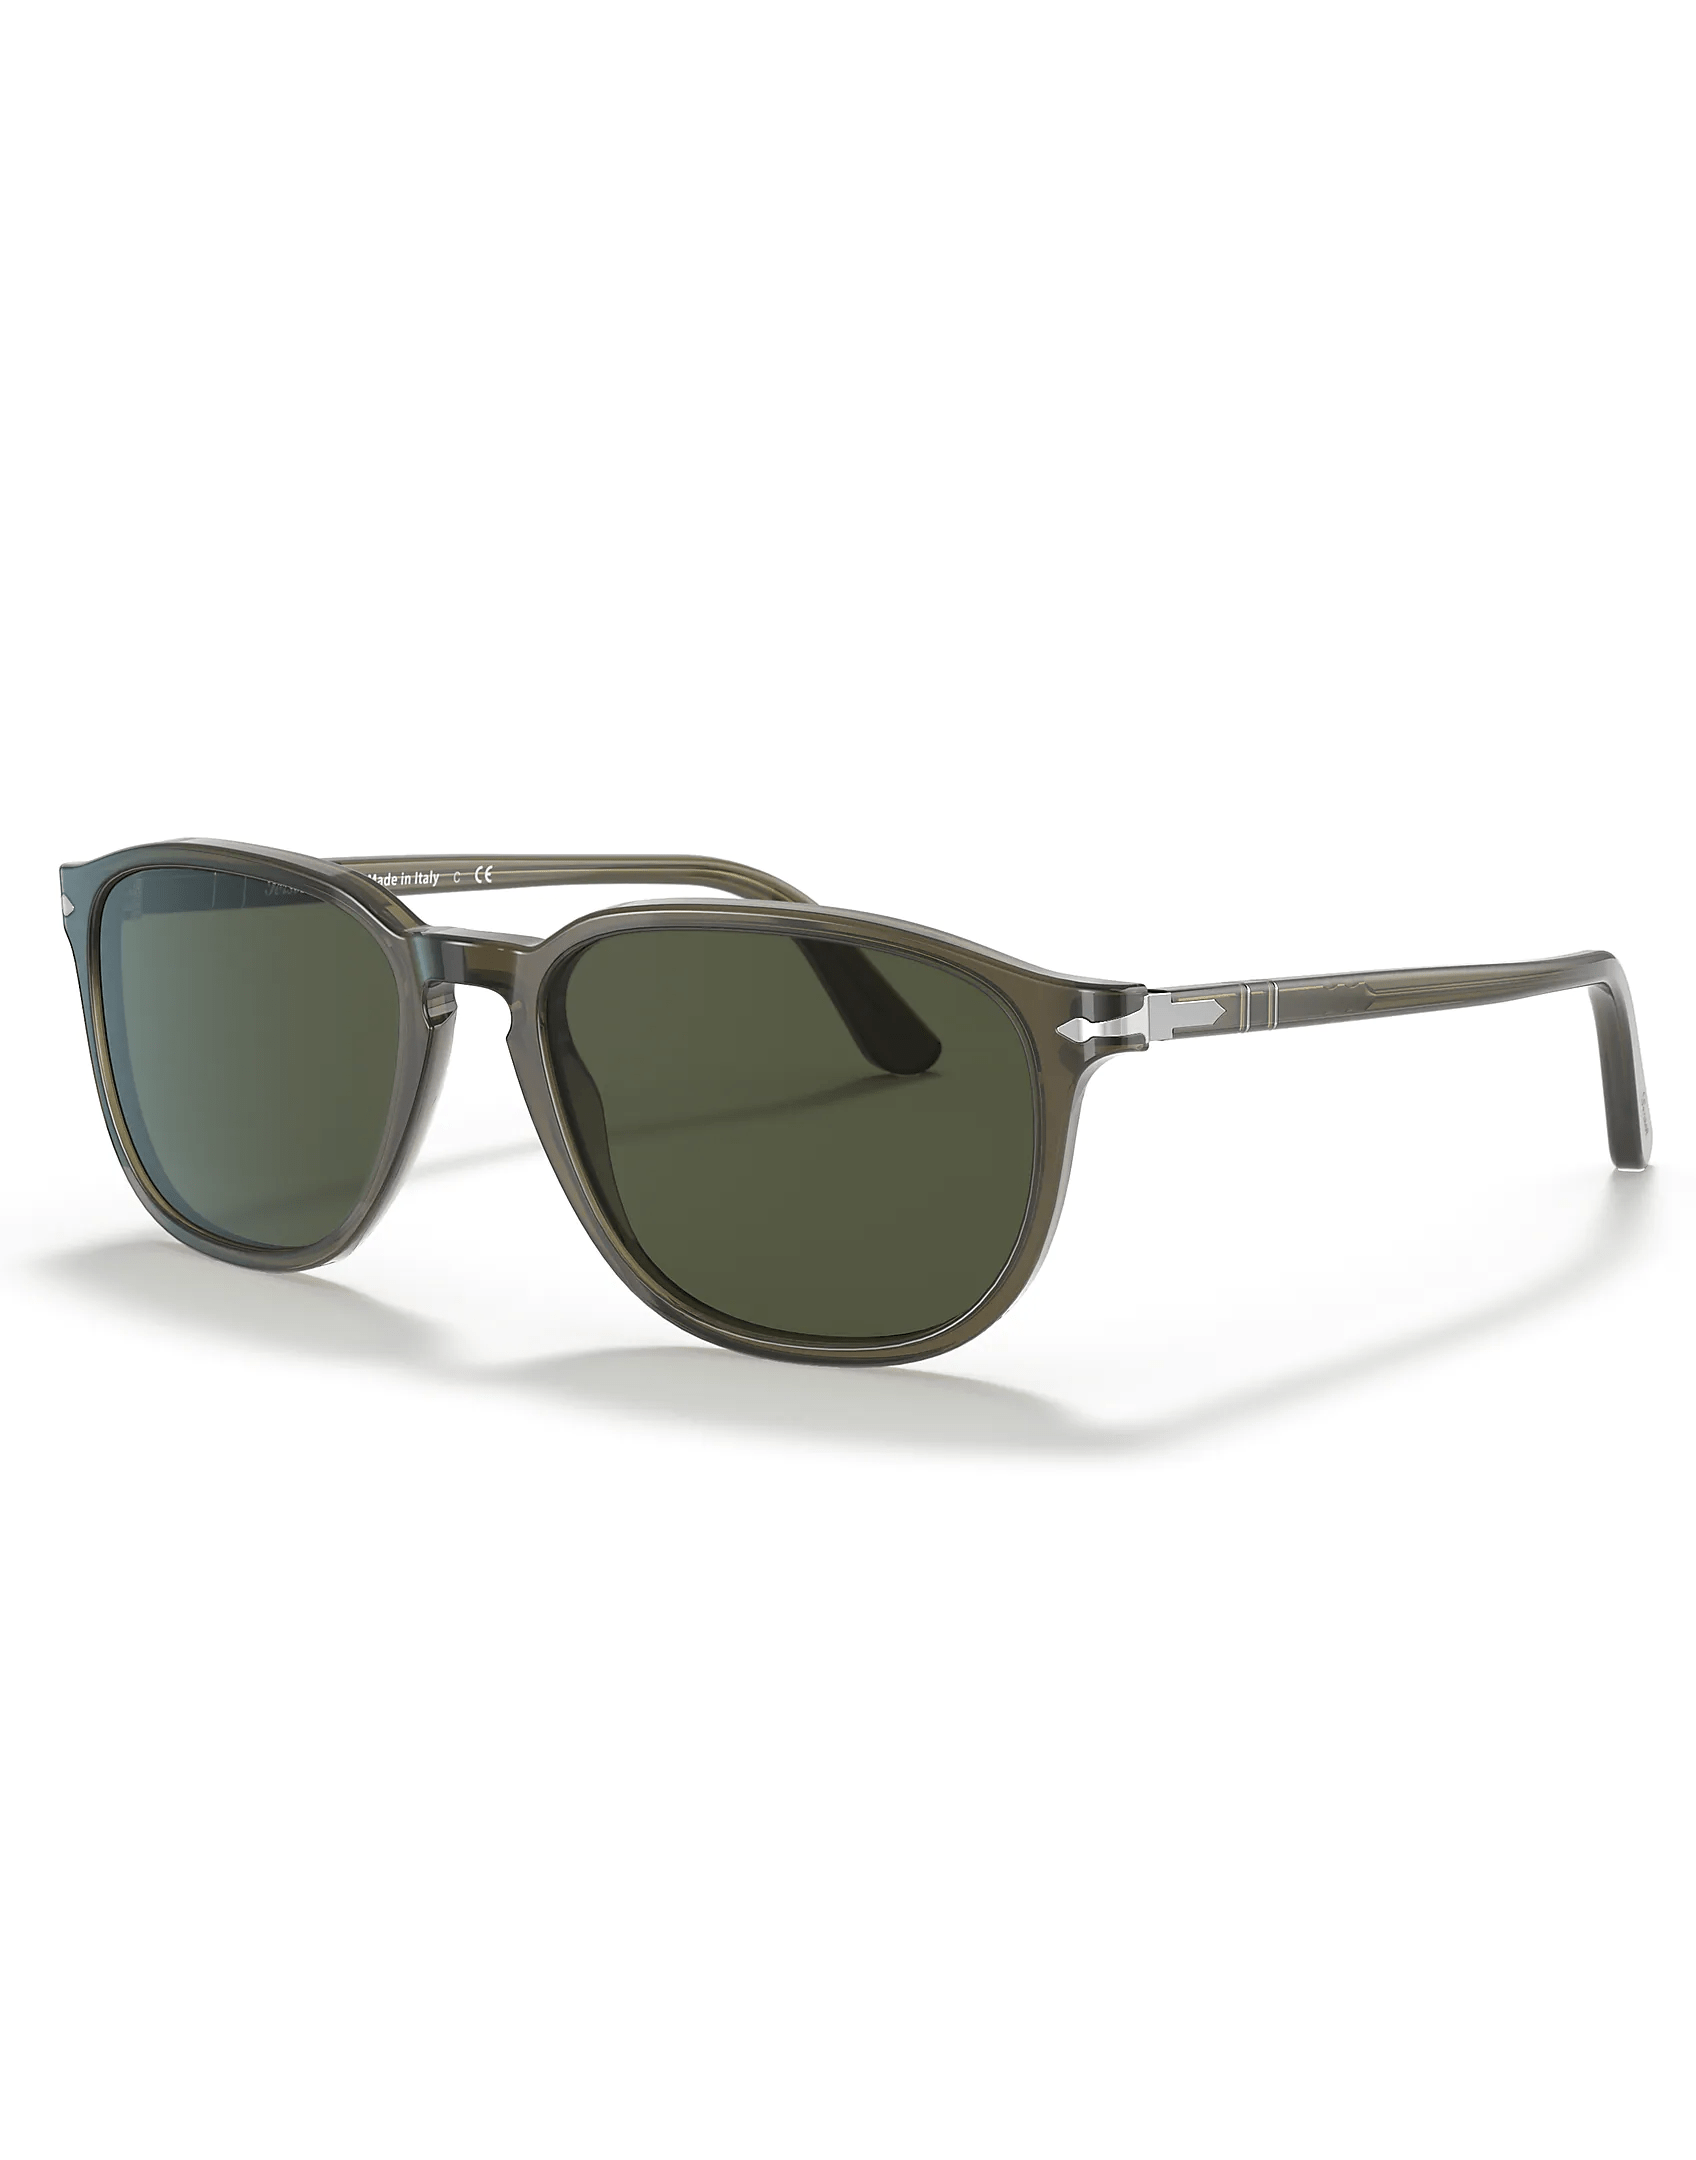 PERSOL-Transparent Grey Square Sunglasses-GRY/GRN